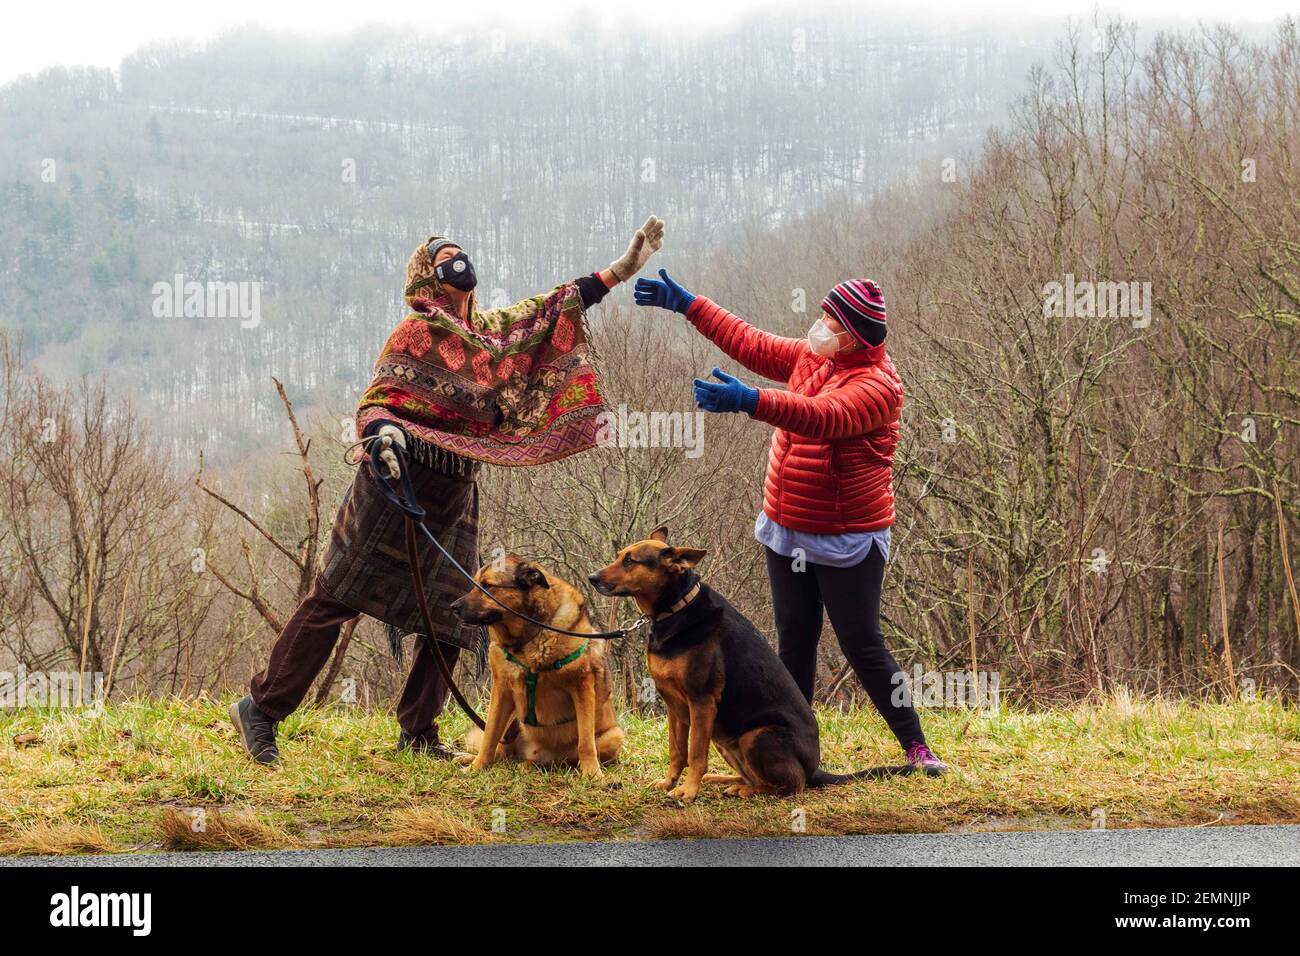 Two friends greet each other effusively, during the pandemic winter of social distancing, on the Blue Ridge Parkway in Asheville, NC, USA. Stock Photo